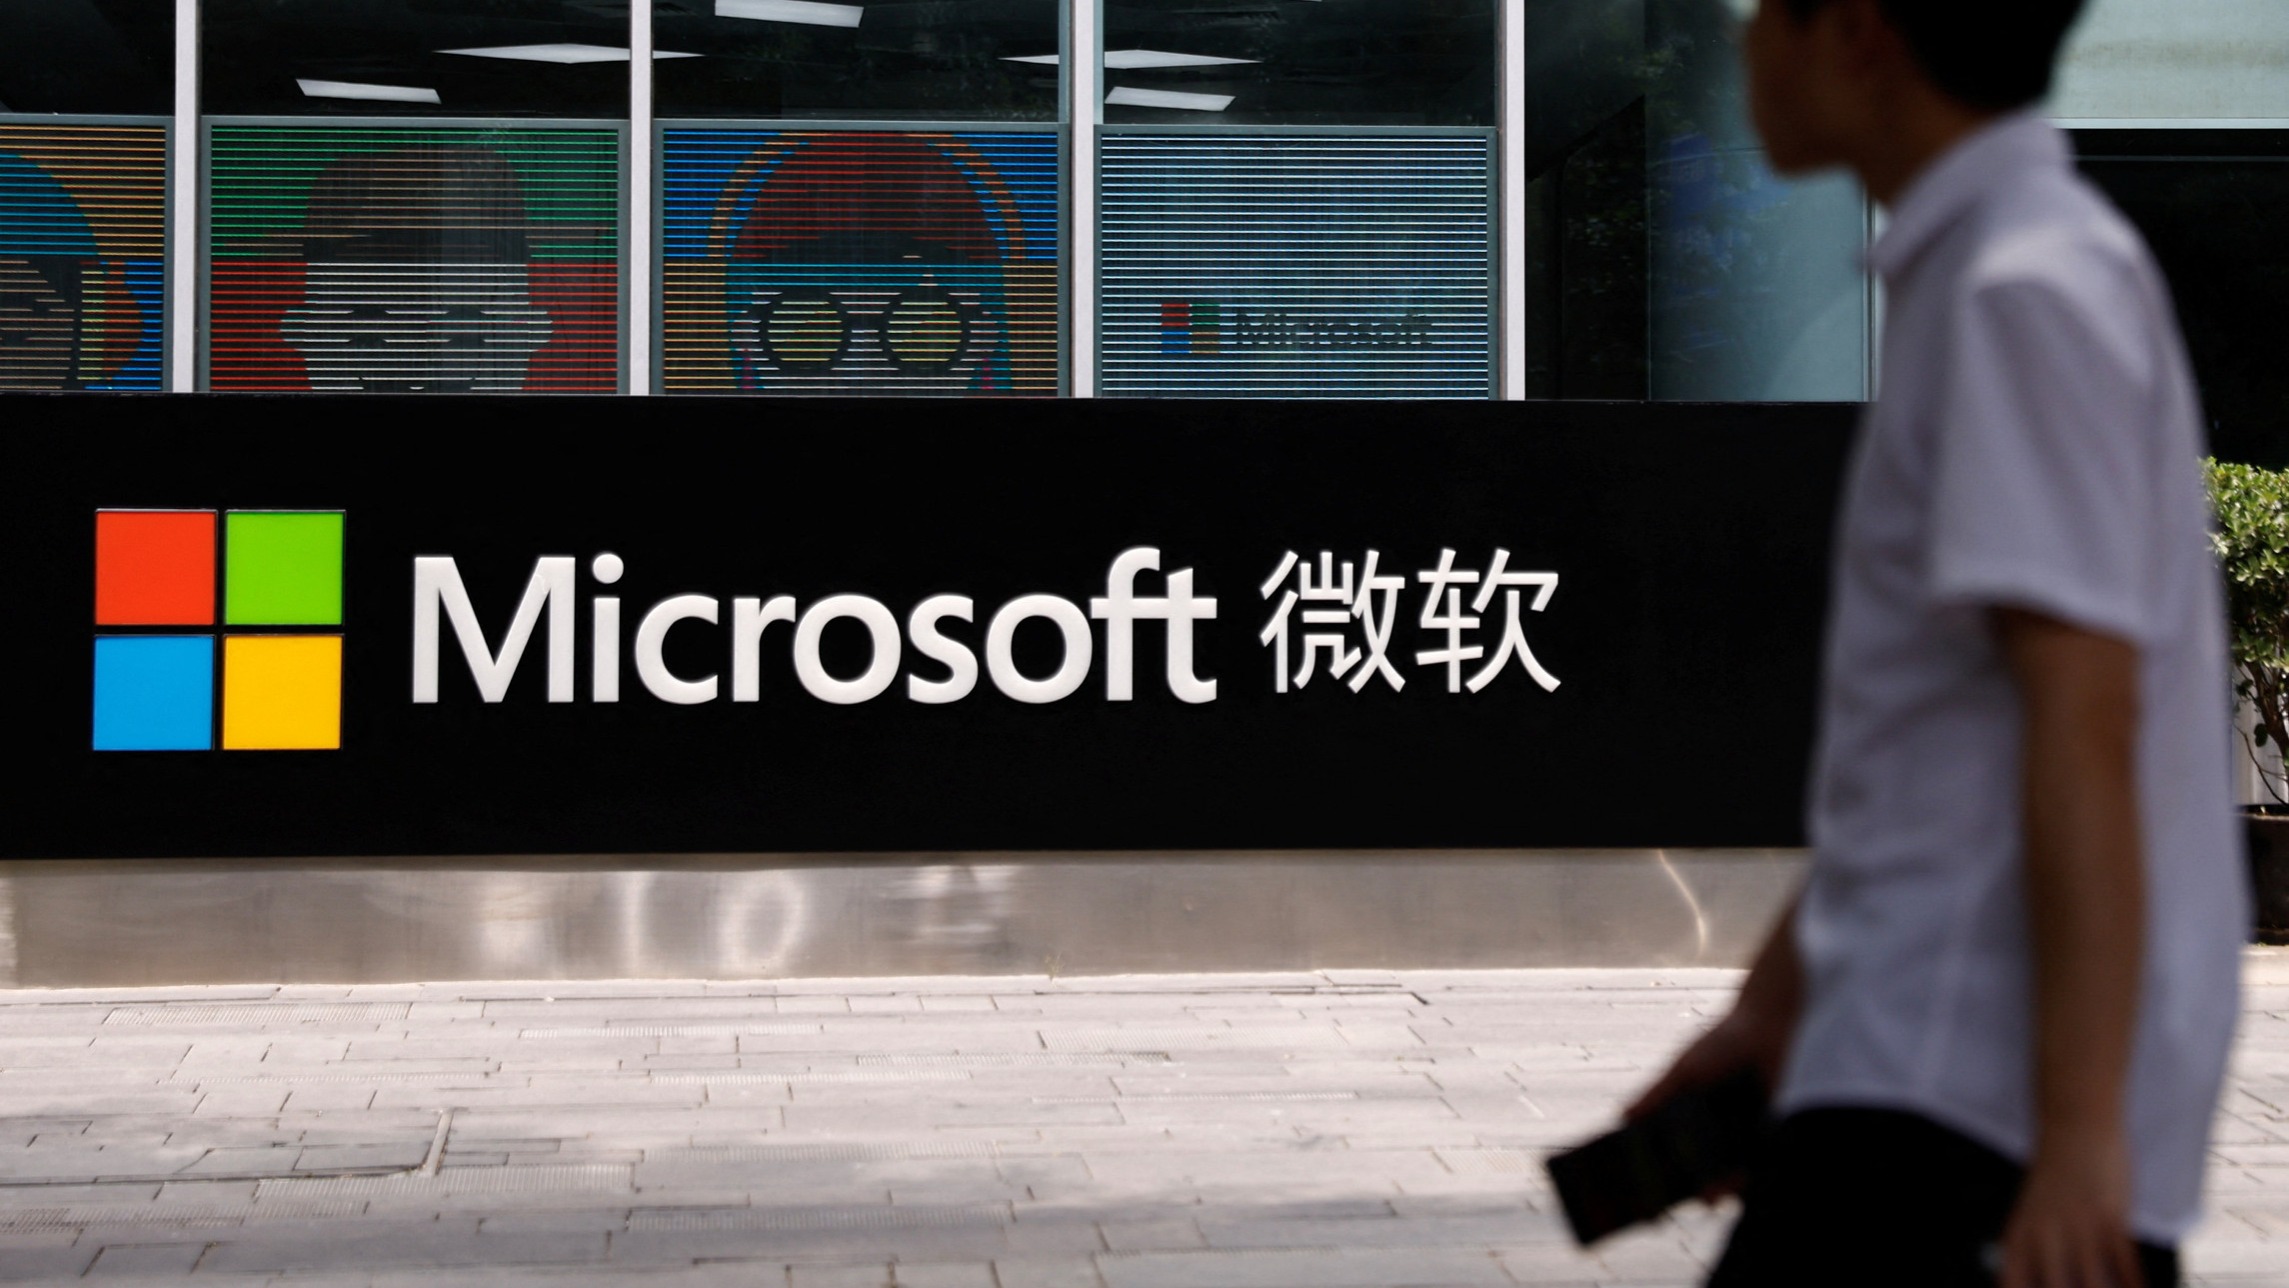 ft.com - Ryan McMorrow - Microsoft moving some top AI experts from China to new lab in Canada